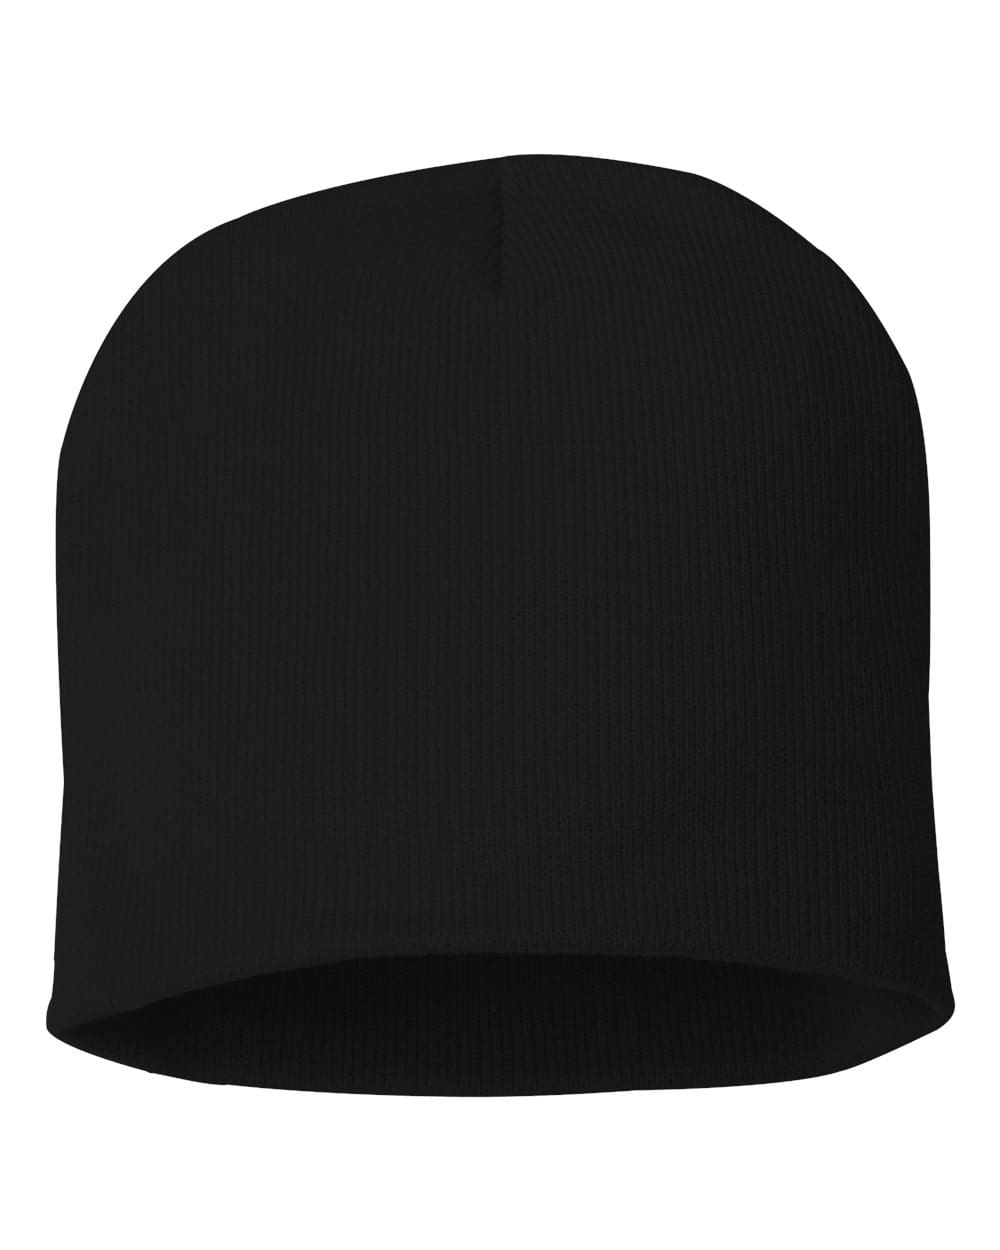 Tight knit skull cap - for embroidery with your design - Whistler